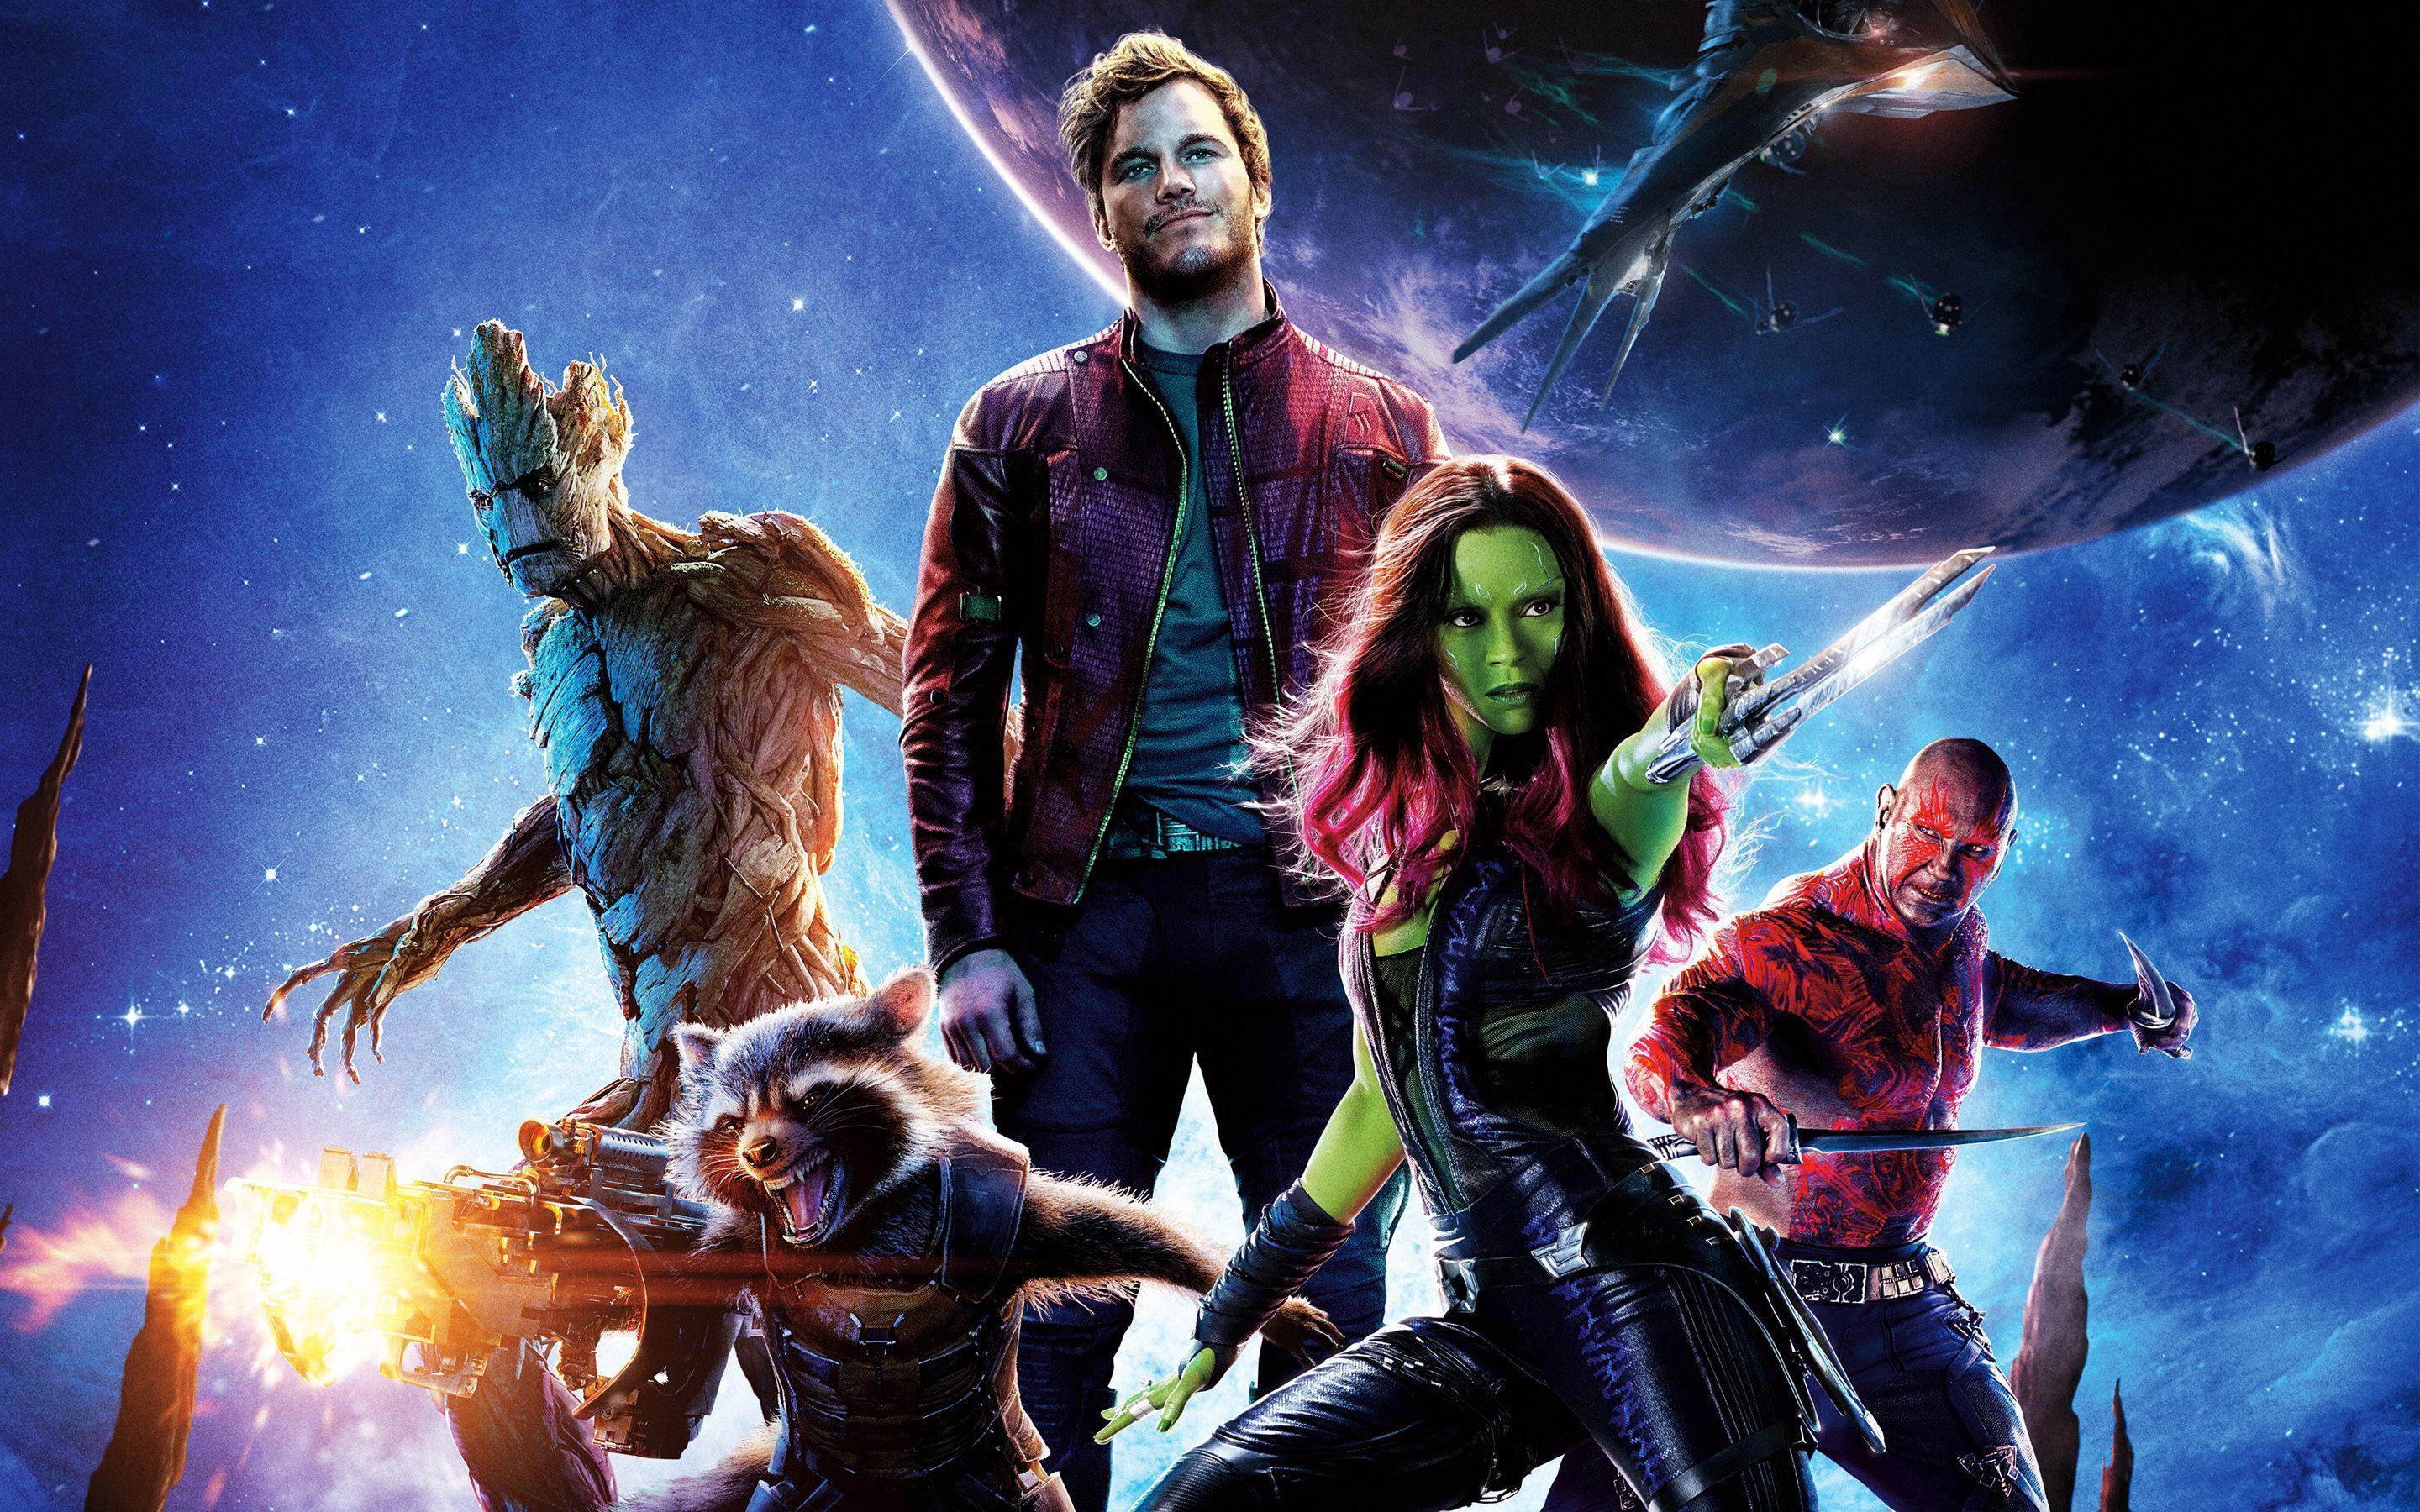 guardians of the galaxy wallpaper laptop